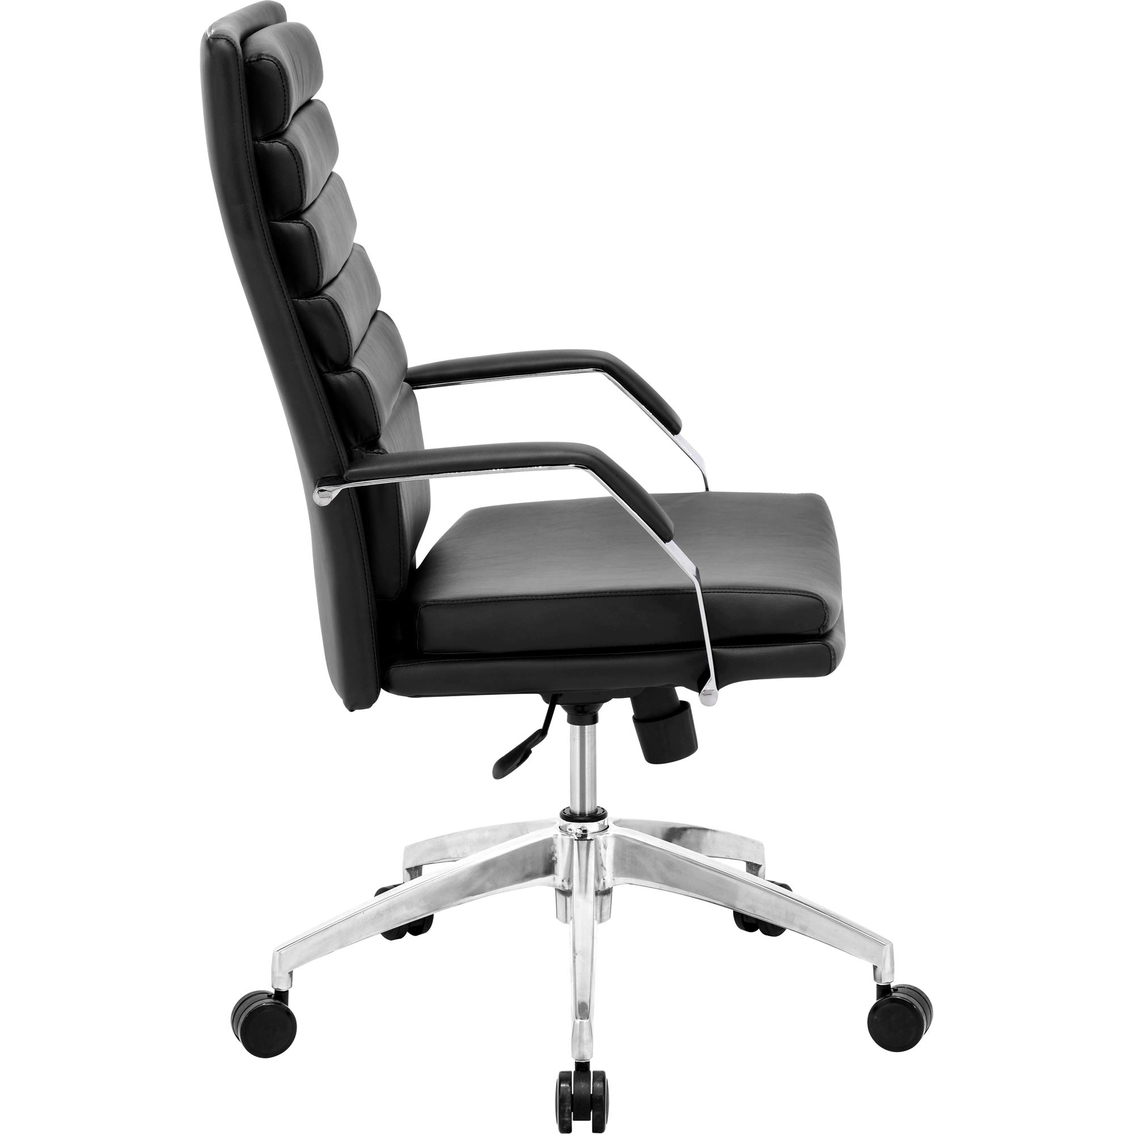 Zuo Modern Director Comfort Office Chair - Image 2 of 4